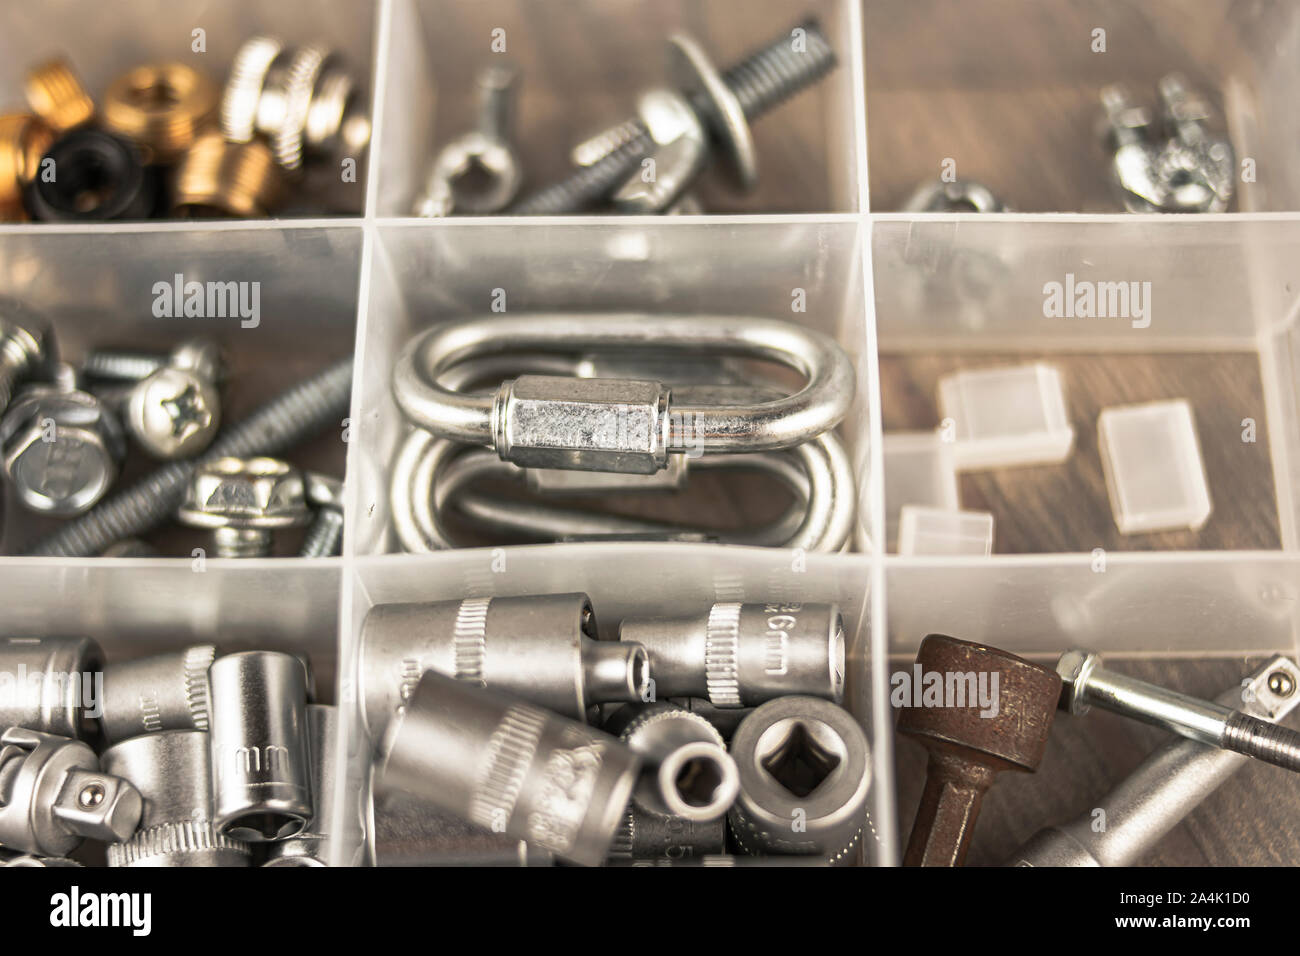 Toolbox with multiple typical elements to fix and repair objects and make improvements to them Stock Photo